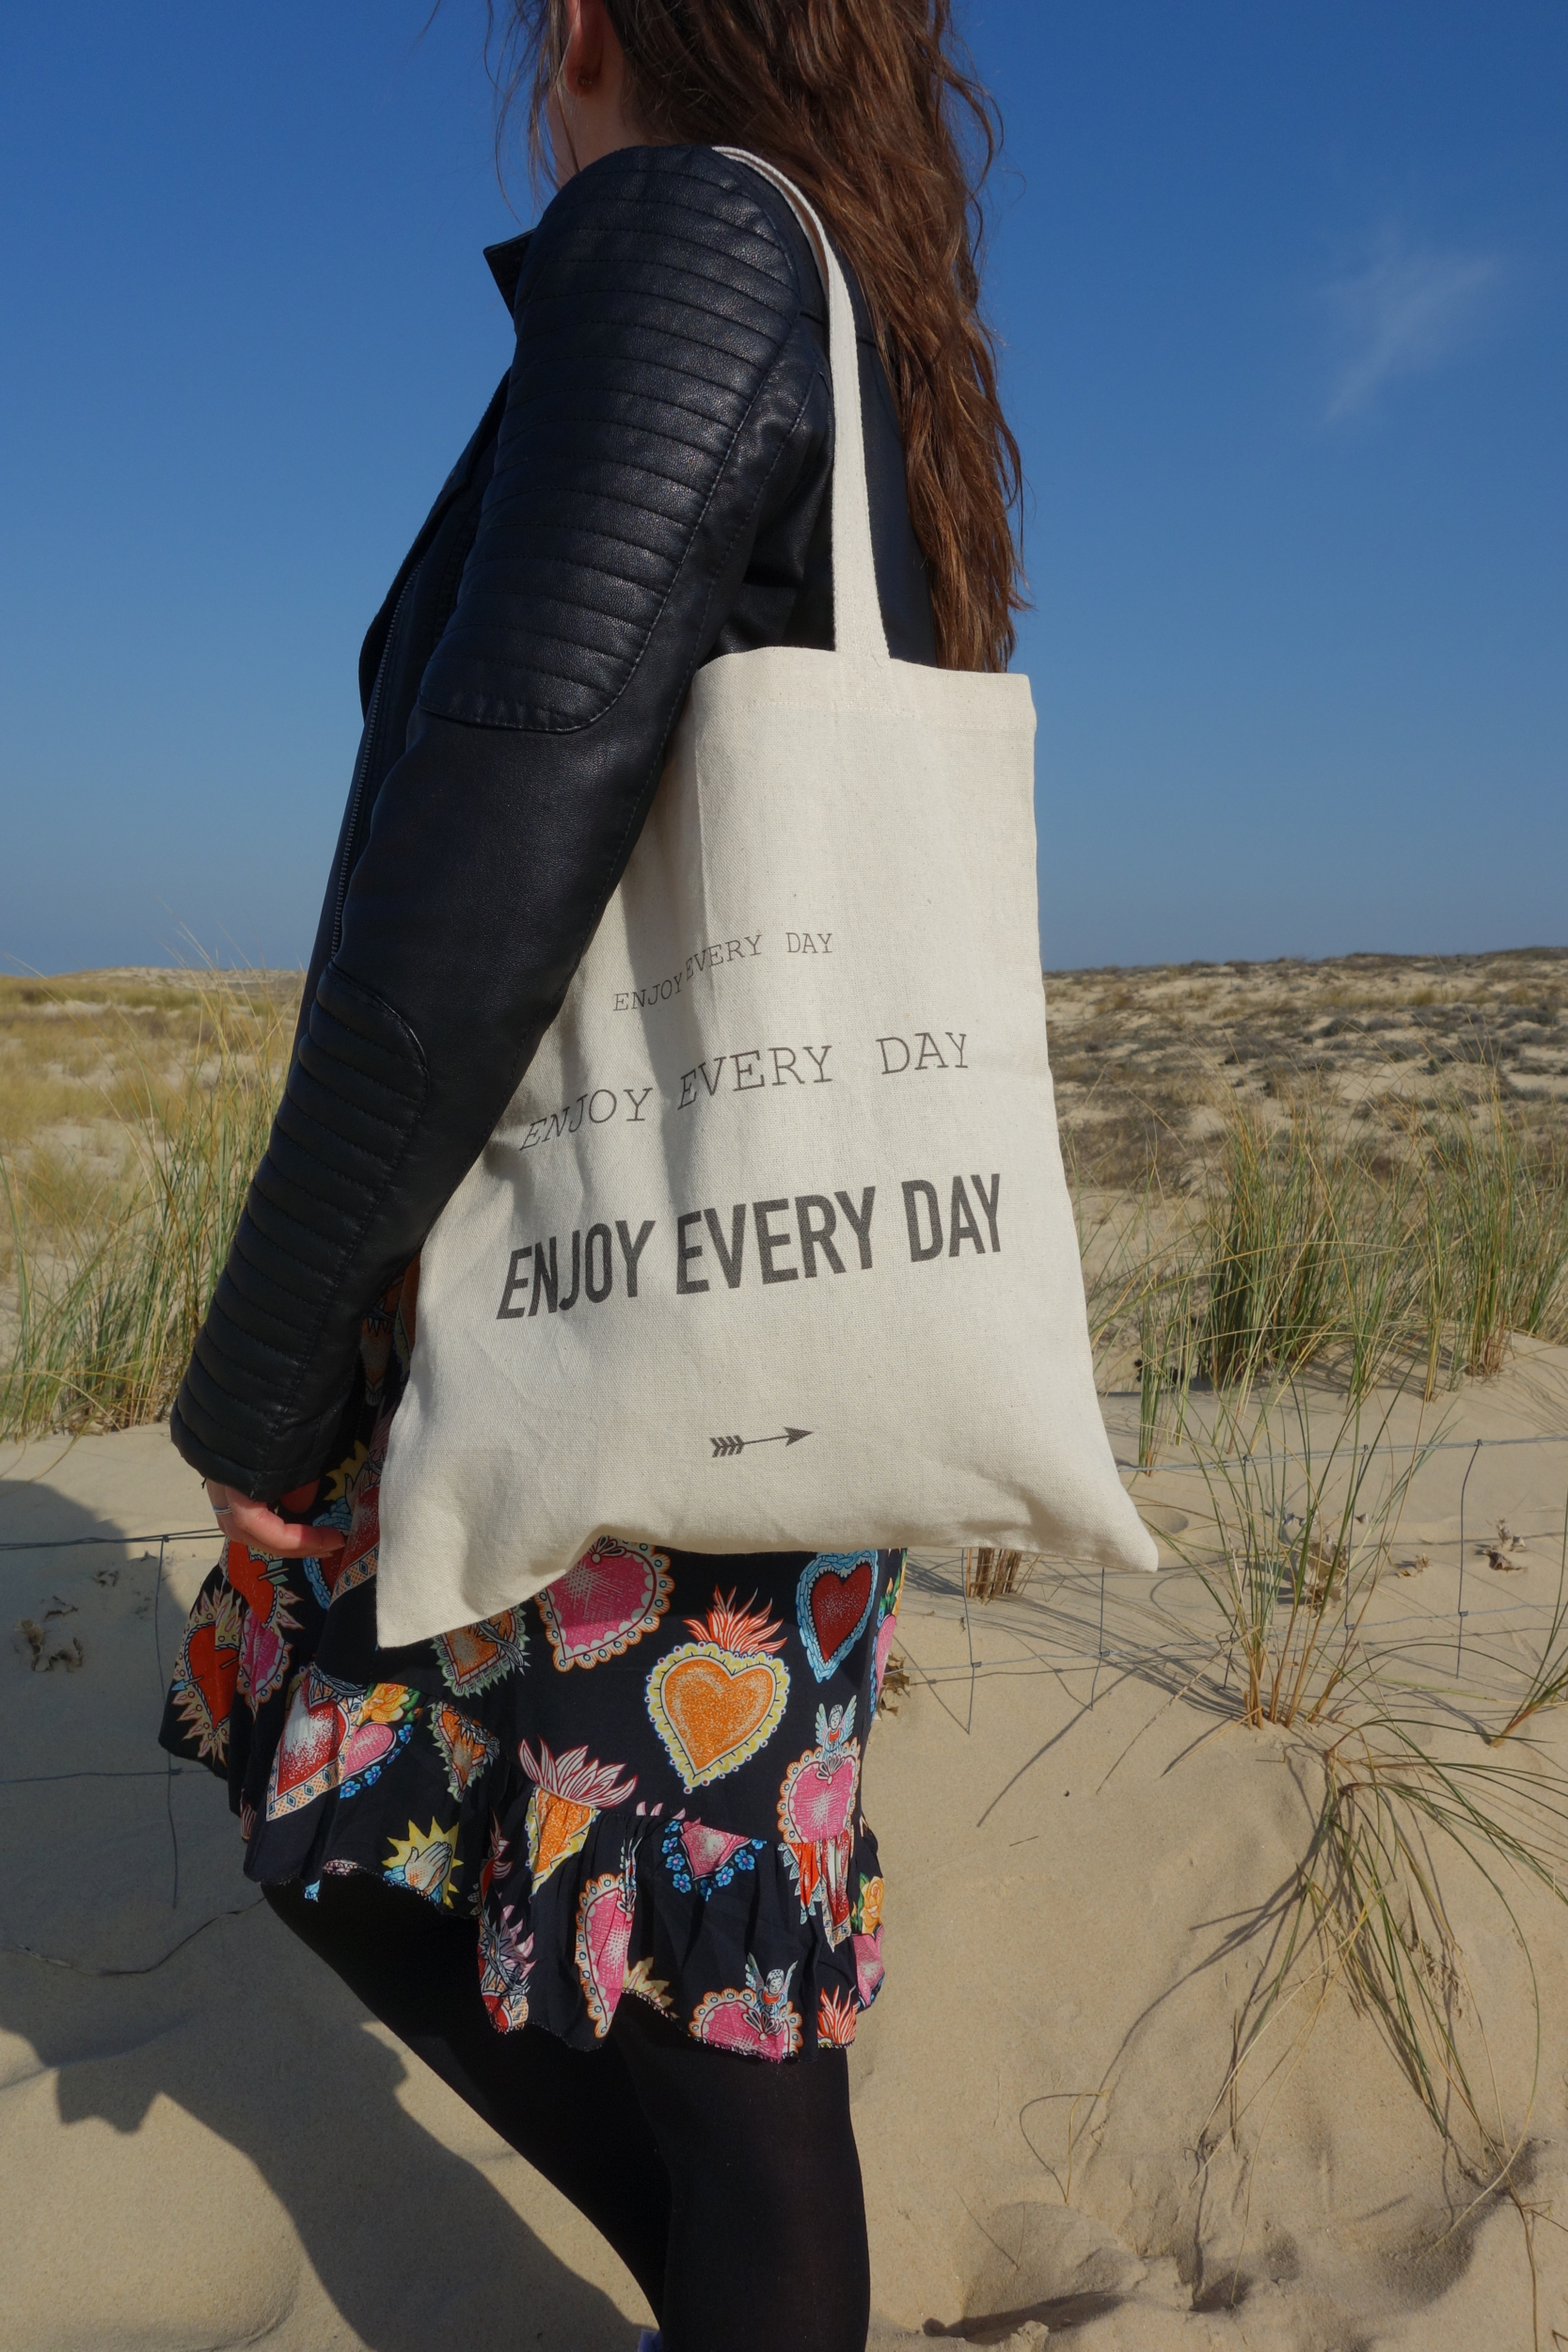 Tote bag, ENJOY EVERY DAY